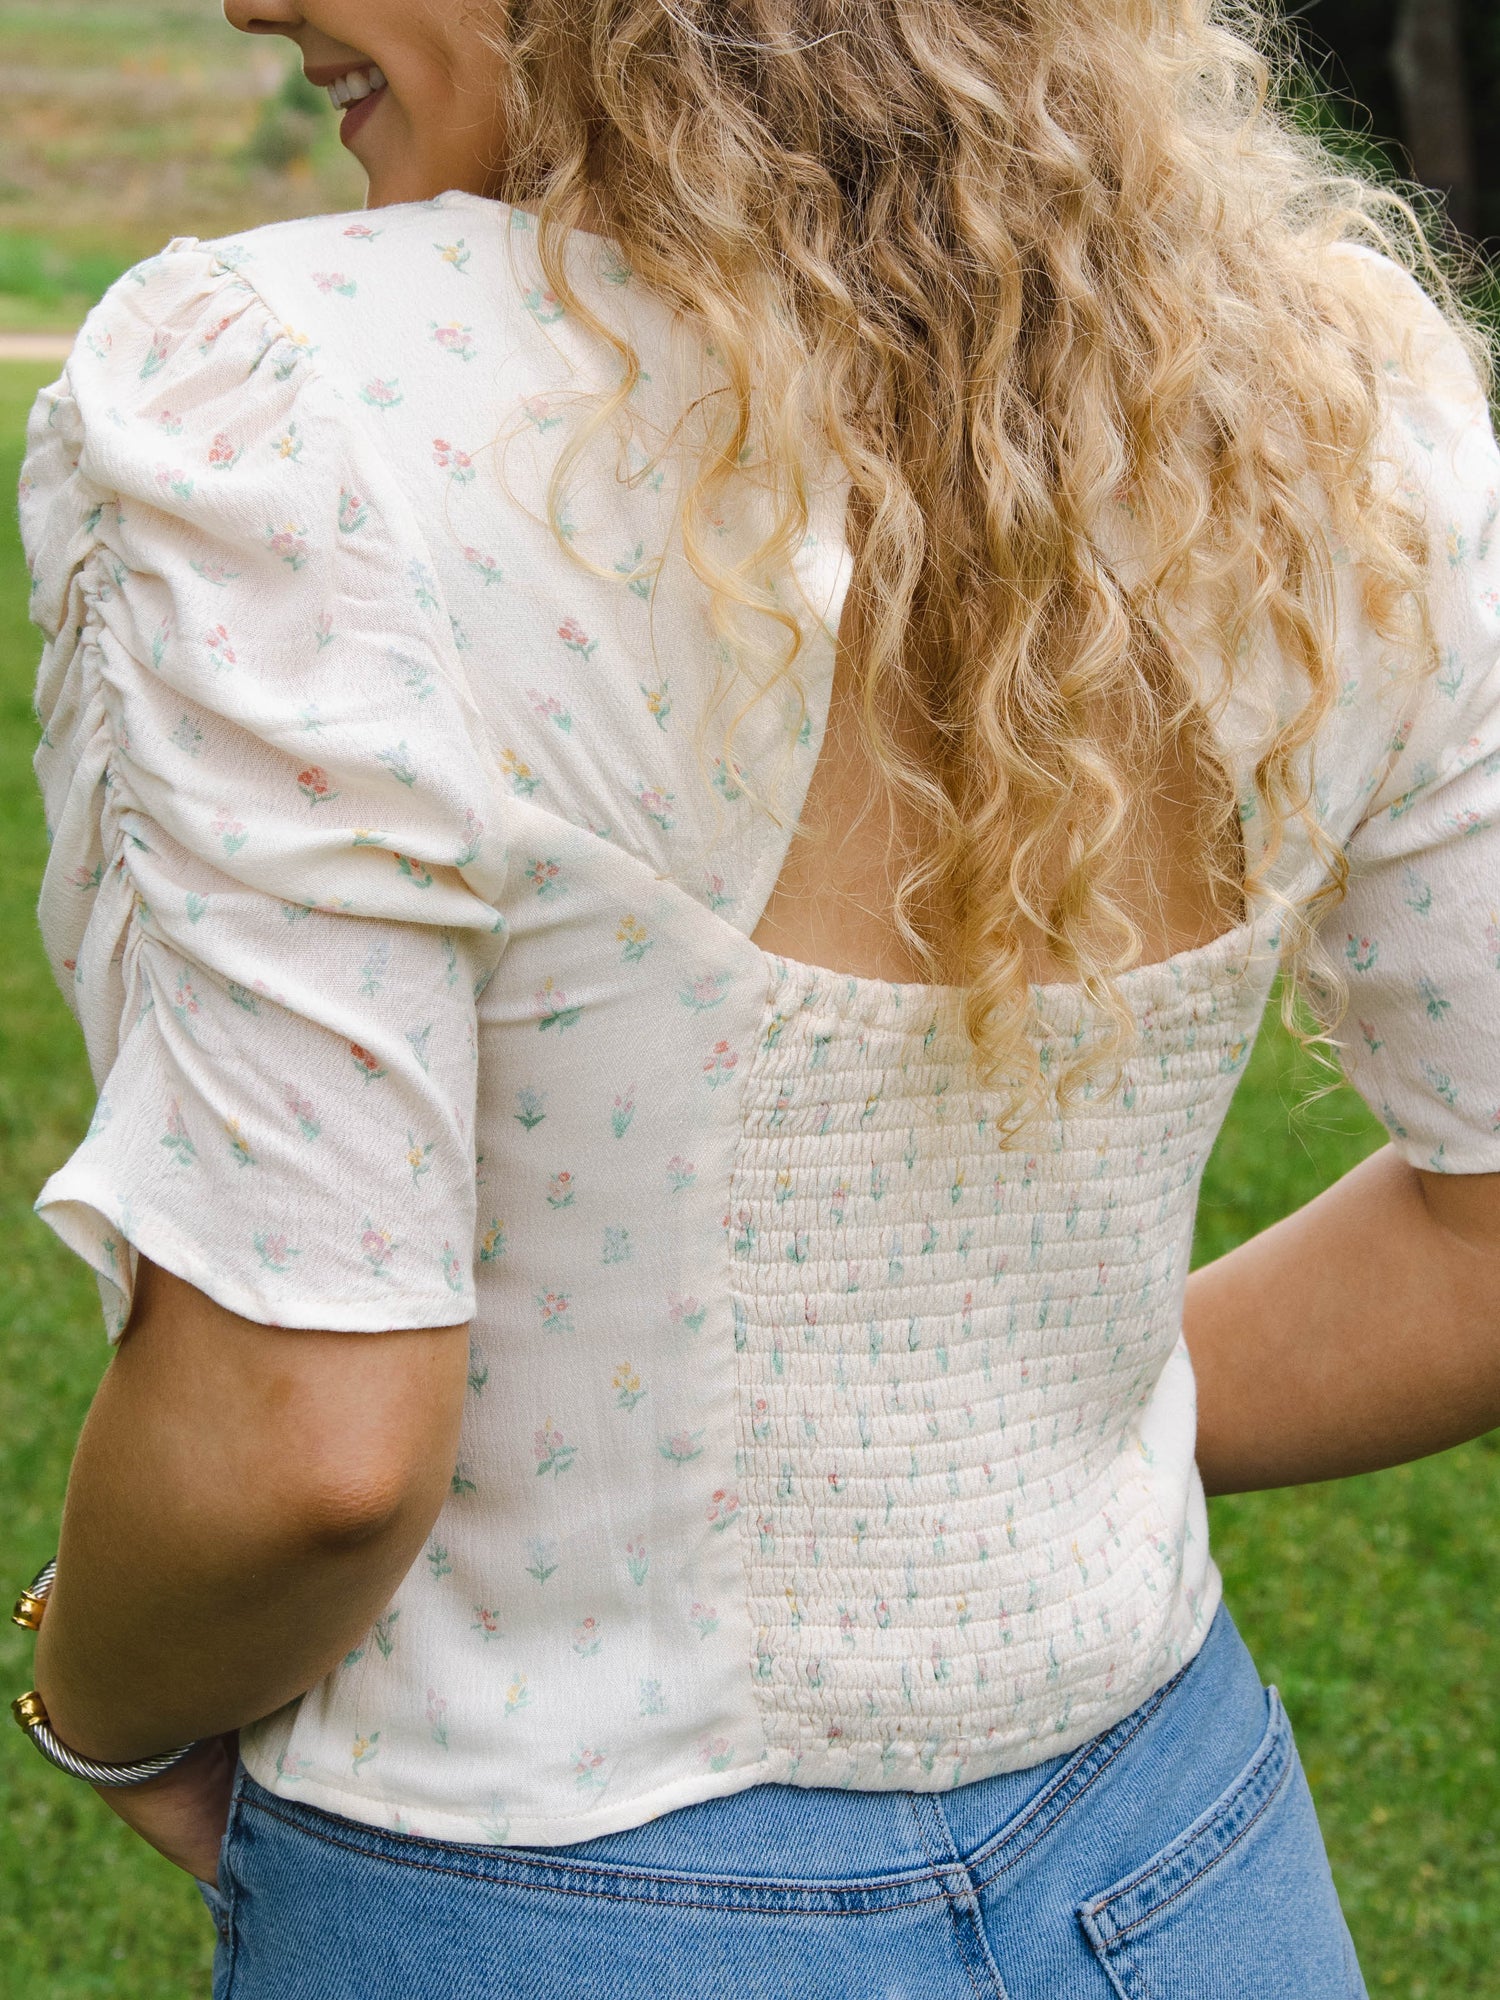 This image of a woman features the product Classic Smocked Cutout Top – Floral Drop. This short sleeve top has a smocked and keyhole back, and synched sleeves. It is a pattern of tiny hand drawn flowers spaced out across a background of cream.